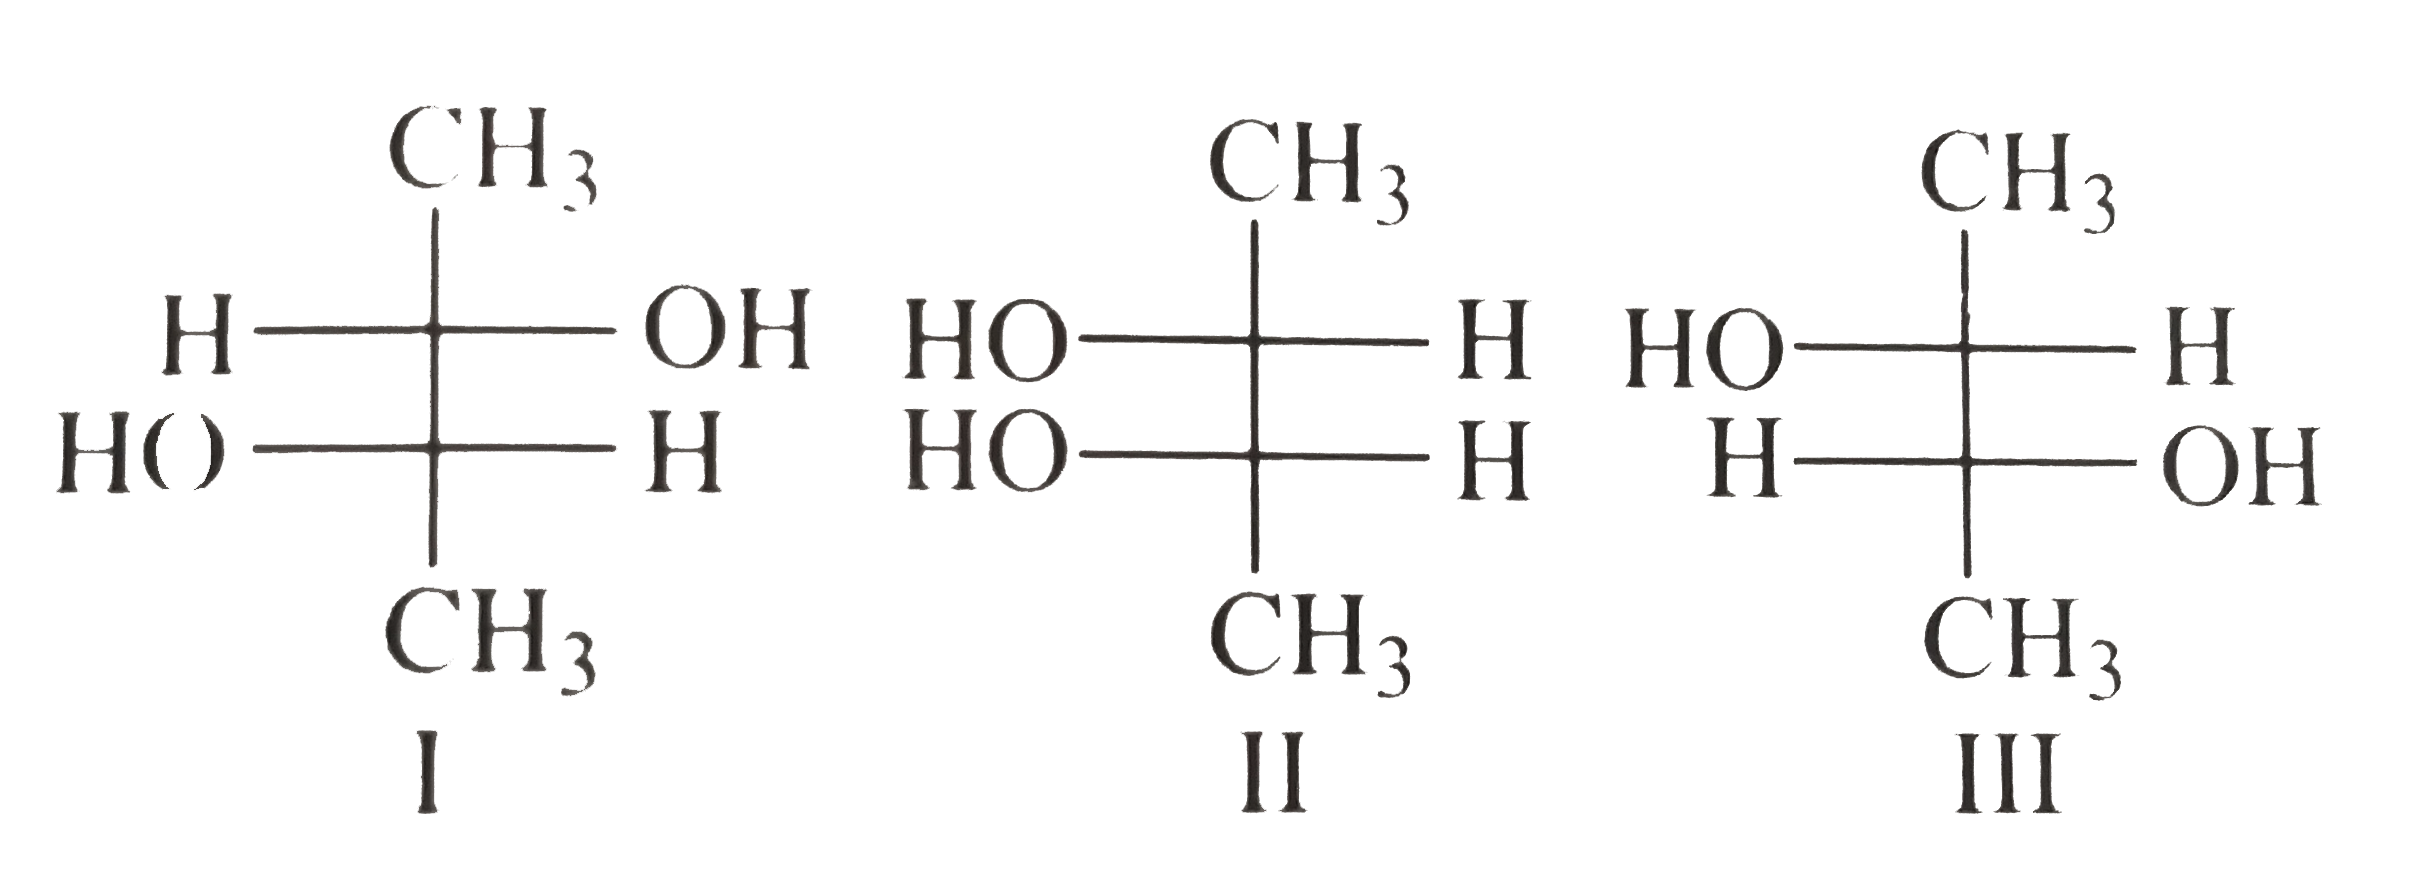 Identify the pairs of enantiomers and diastereomers from the following: